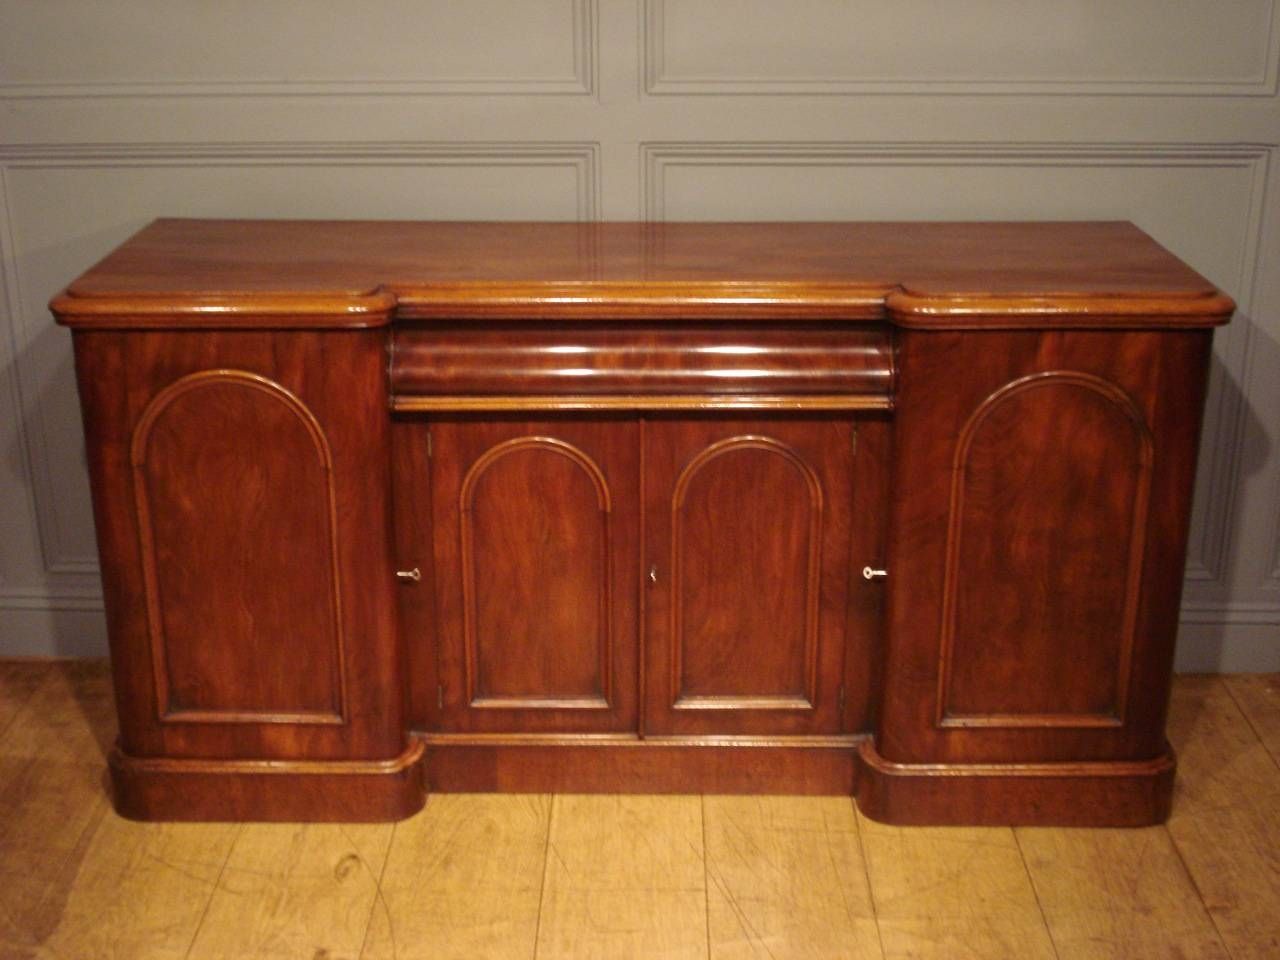 Sold/mid 19th Century Mahogany Sideboard – Antique Sideboards Inside Mahogany Sideboards (View 7 of 15)